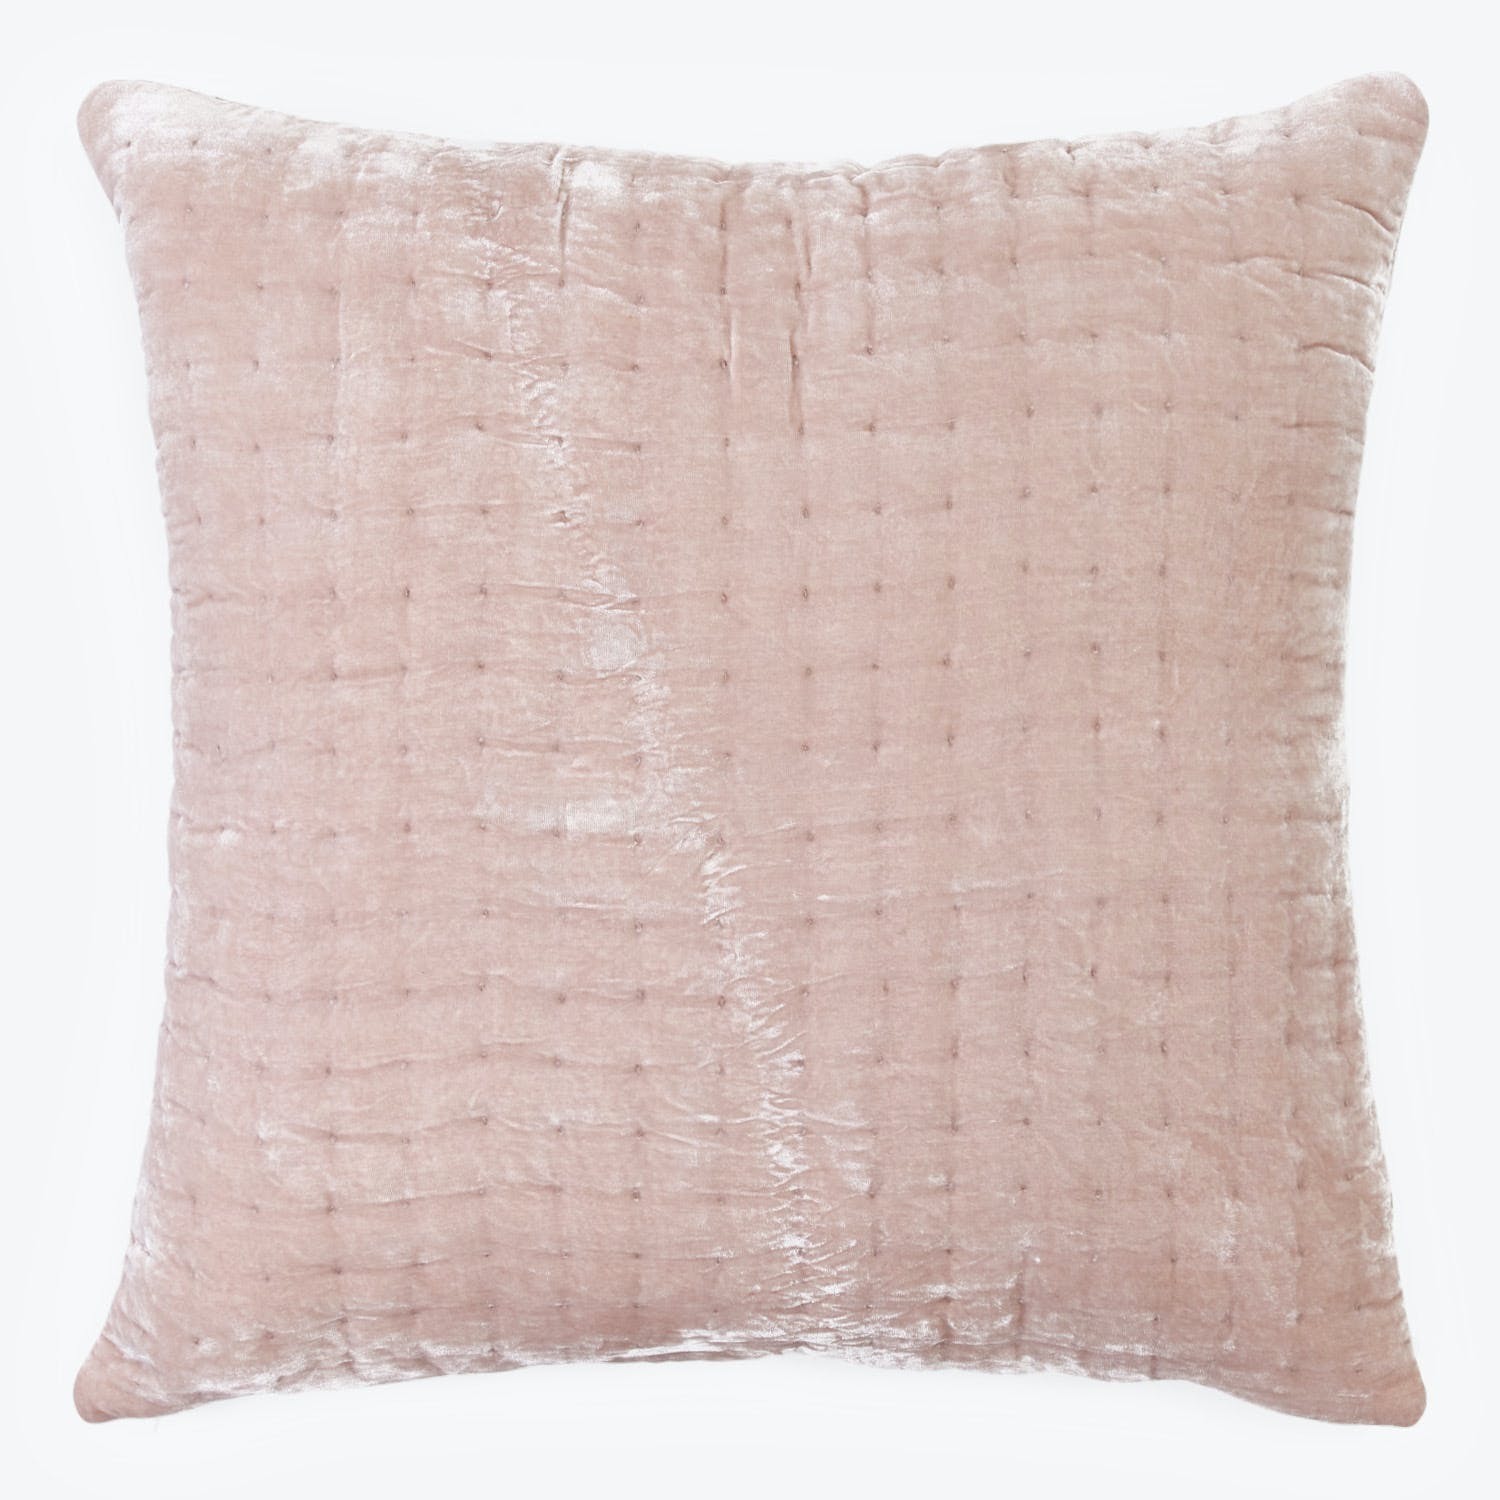 Soft pink velvet pillow with textured surface adds sophisticated charm.